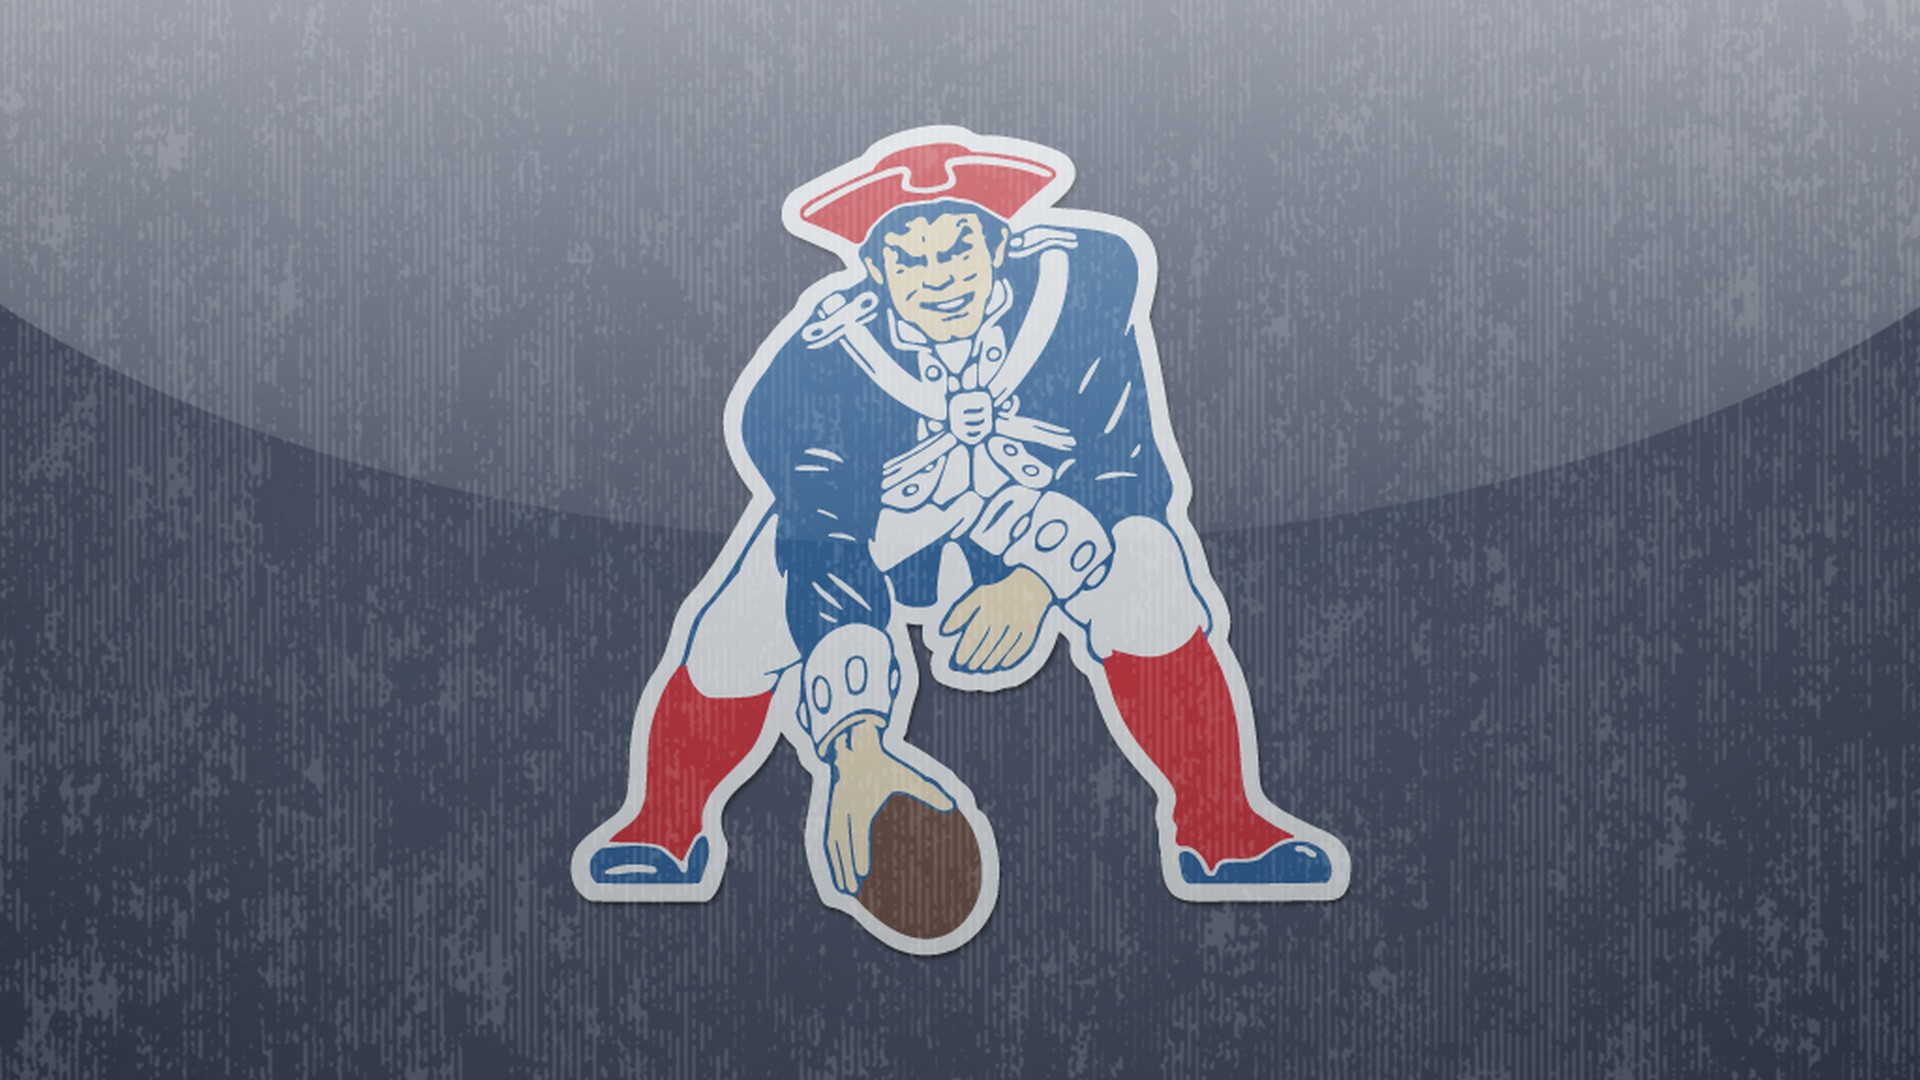 New England Patriots Wallpaper For Mac with resolution 1920x1080 pixel. You can make this wallpaper for your Mac or Windows Desktop Background, iPhone, Android or Tablet and another Smartphone device